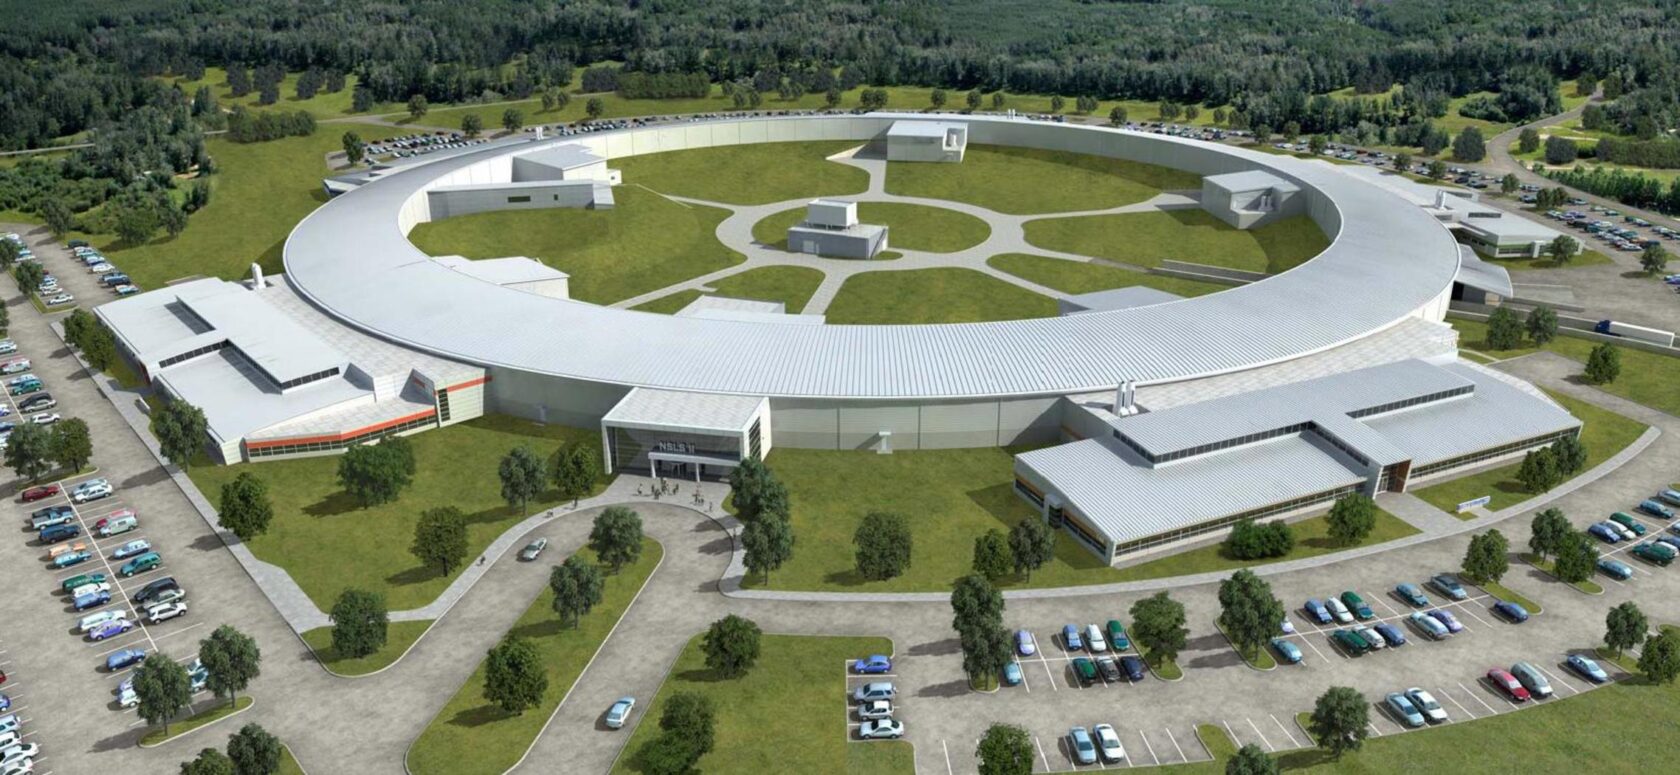 National Synchrotron Light Source II, Rendering of the Nati…